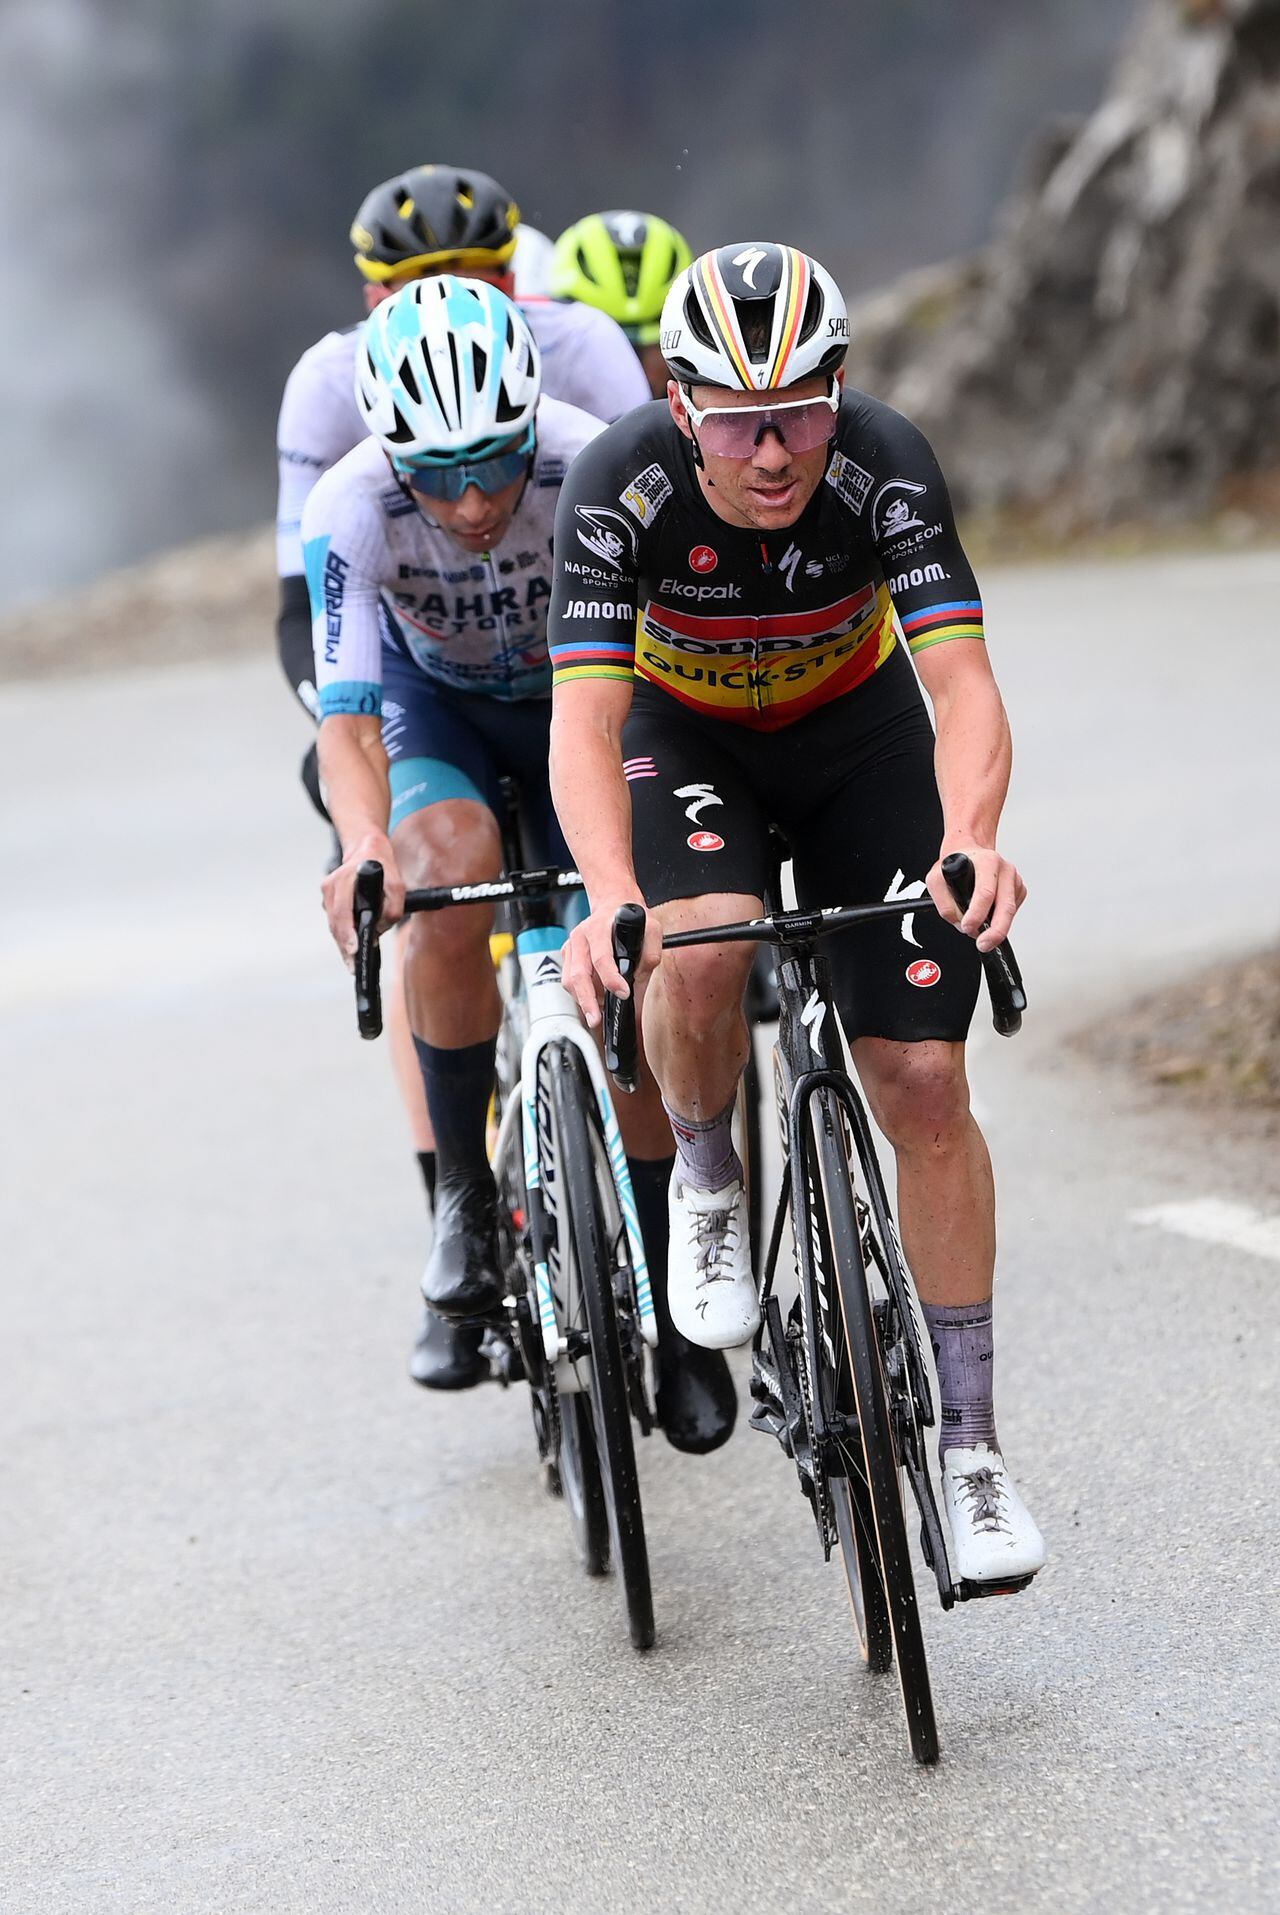 MADONE D'UTELLE, FRANCE - MARCH 09: (L-R) Santiago Buitrago of Colombia and Team Bahrain - Victorious and Remco Evenepoel of Belgium and Team Soudal - Quick Step compete in the chase group during the 82nd Paris - Nice 2024, Stage 7 a 103.7km stage from Nice to Madone d'Utelle 1166m / Route modified due to adverse weather conditions / #UCIWT / on March 09, 2024 in Madone d'Utelle, France. (Photo by Alex Broadway/Getty Images)